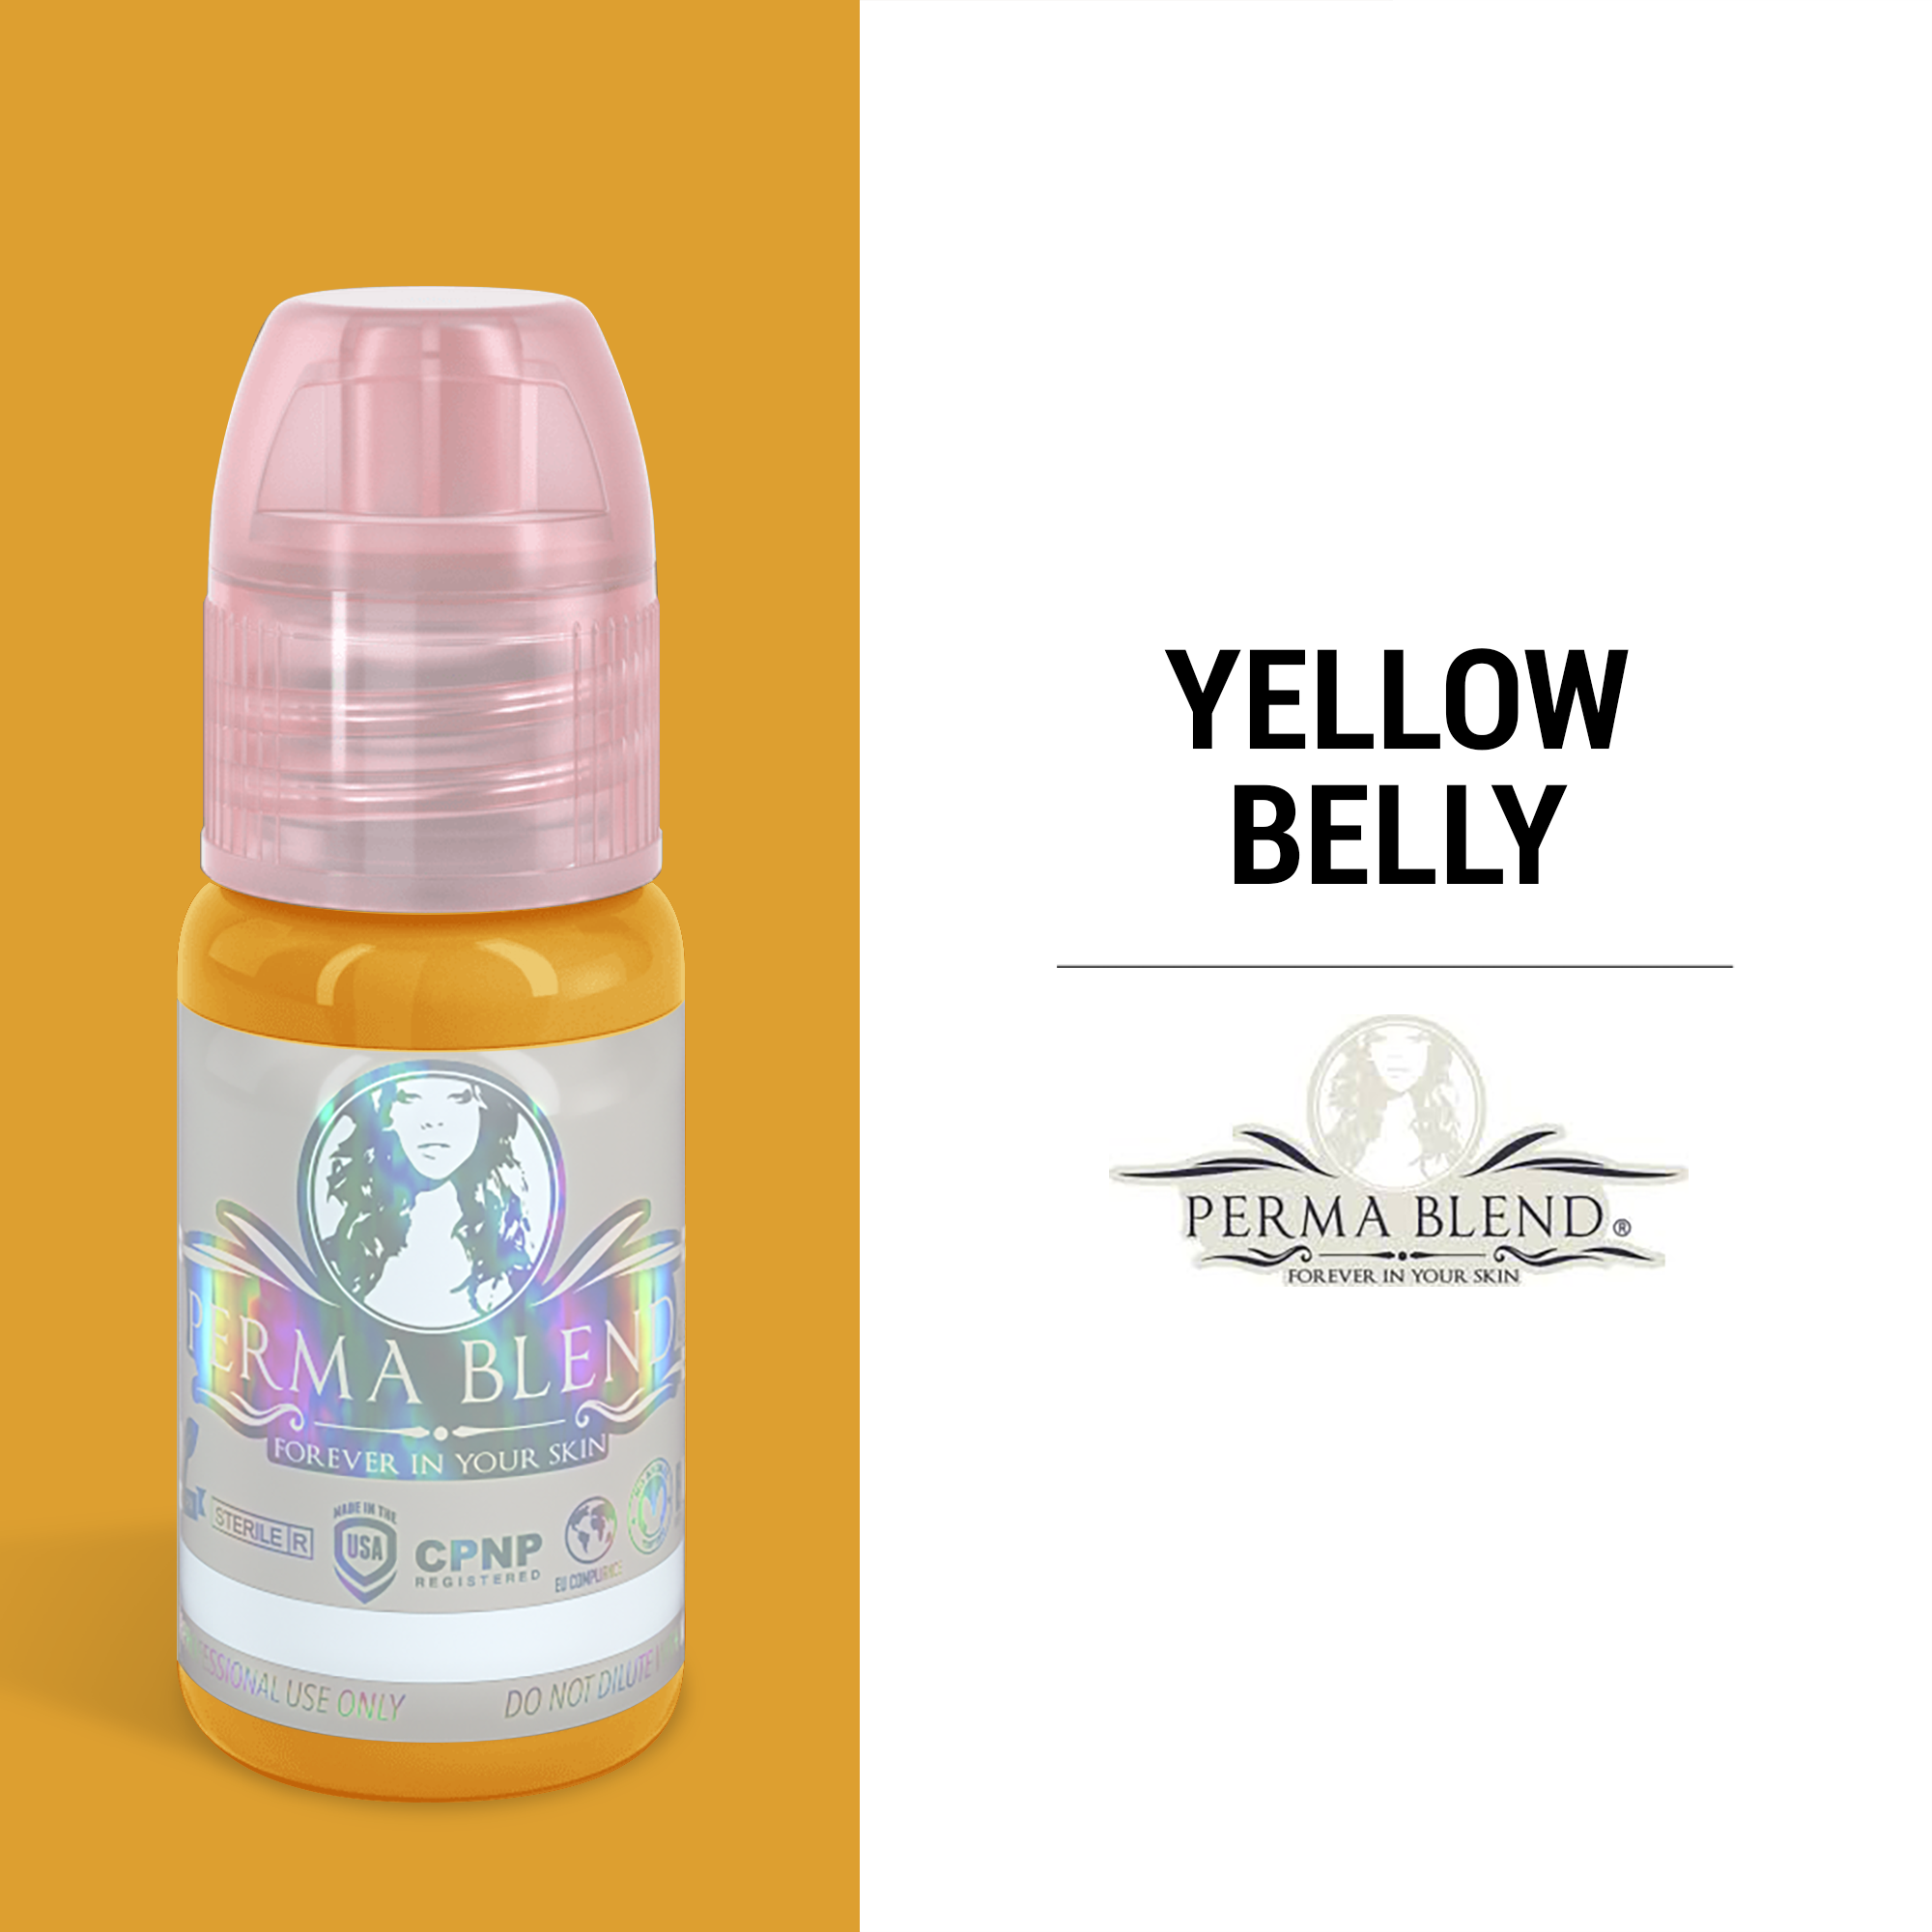 Perma Blend Yellow Belly